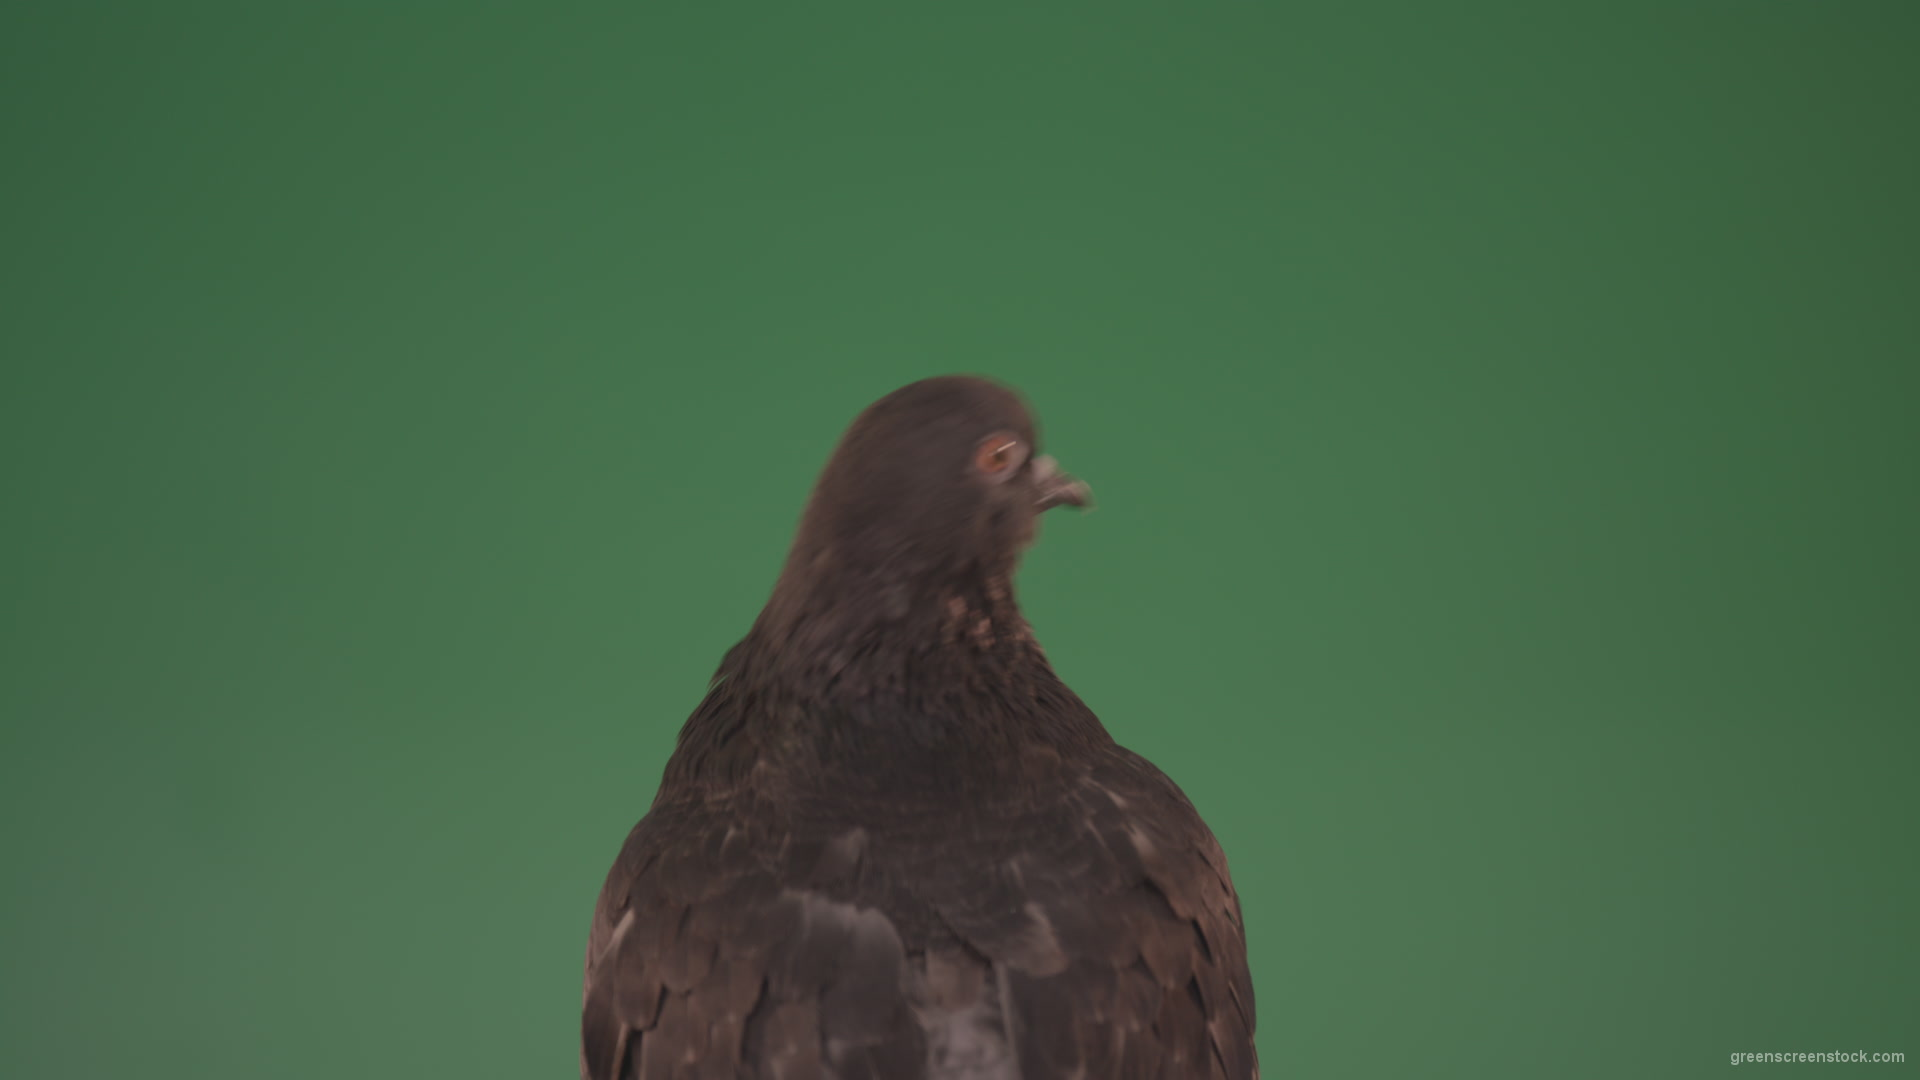 Sitting-wings-to-the-chicken-bird-home-pigeon-isolated-on-chromakey-background_001 Green Screen Stock